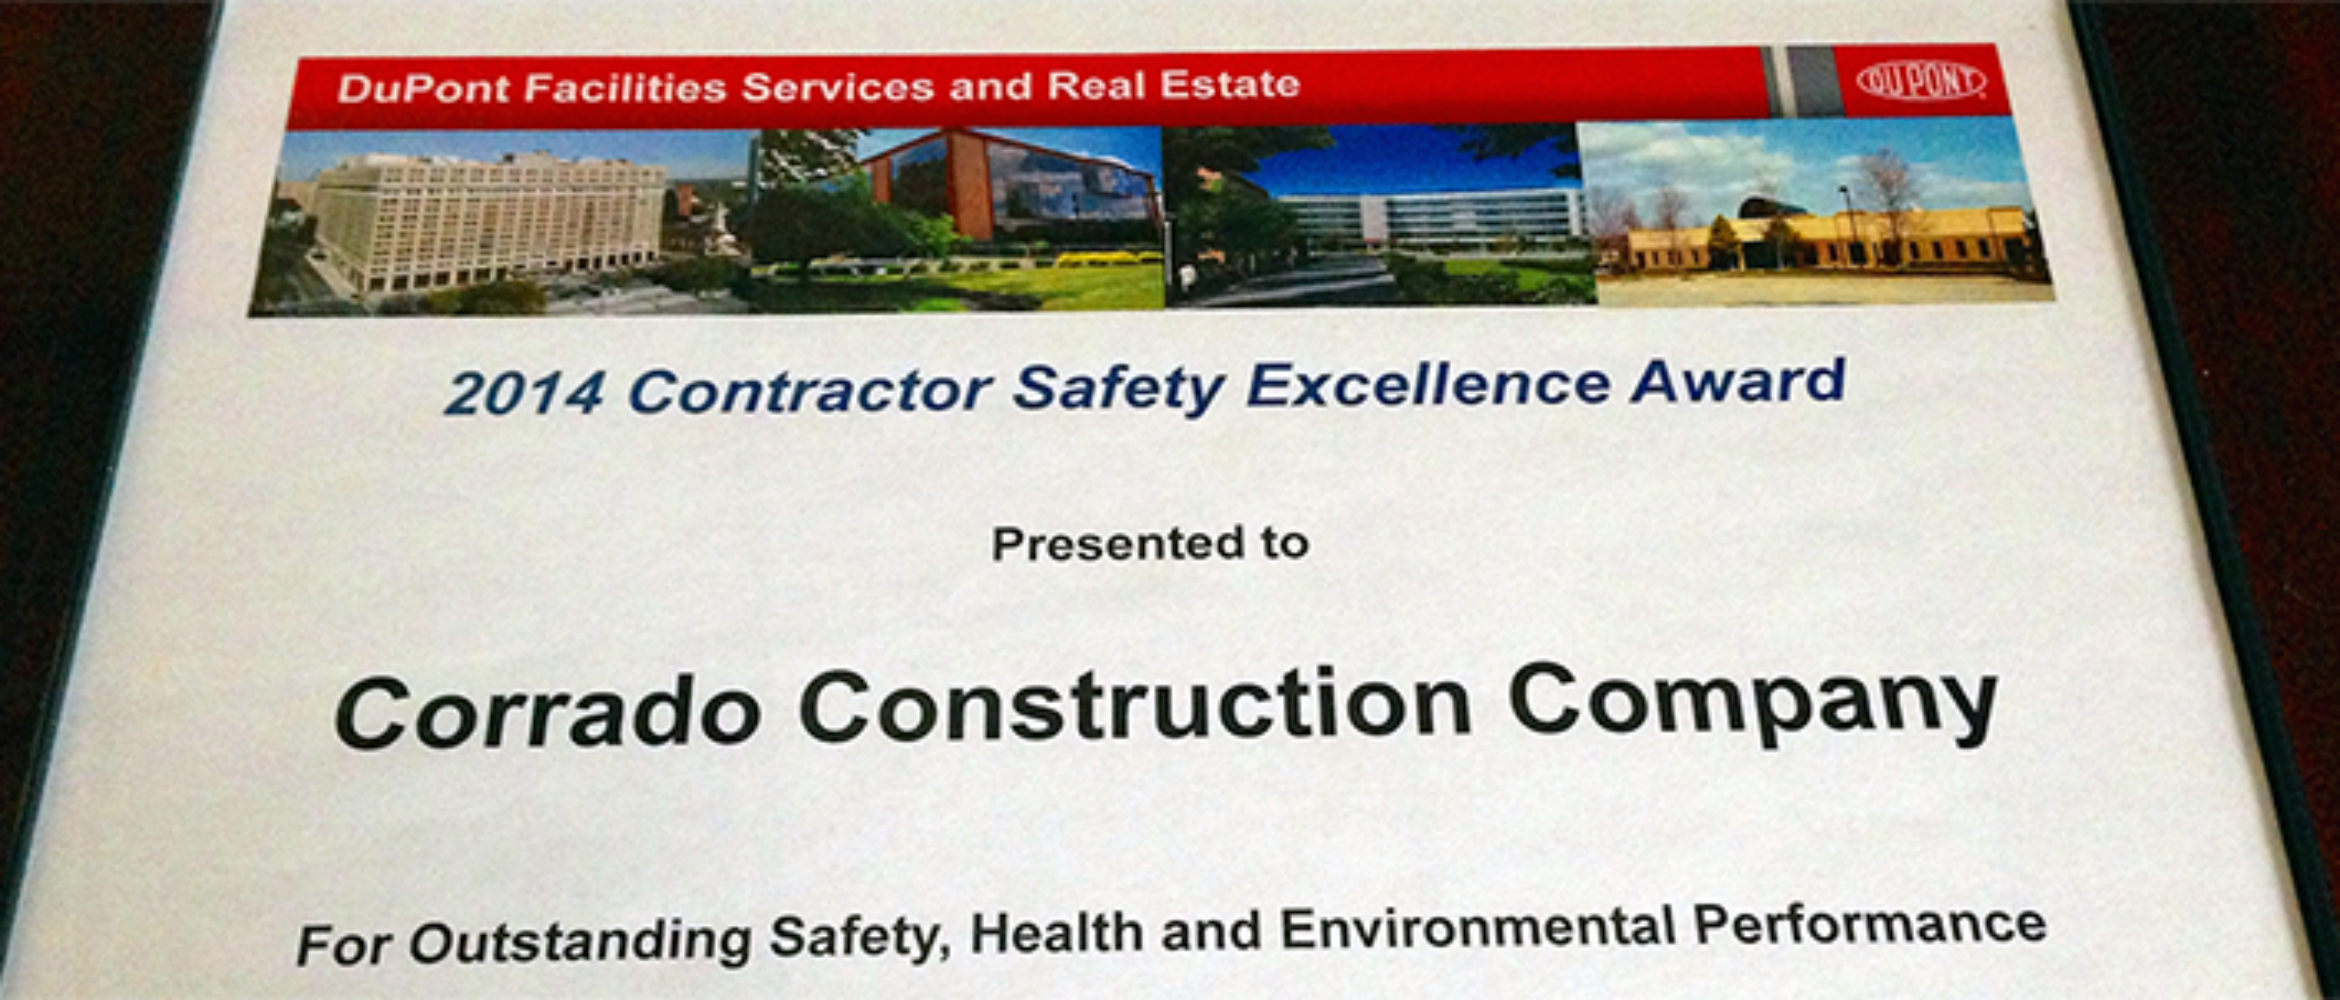 DuPont’s Safety Excellence Award Goes to Corrado Construction